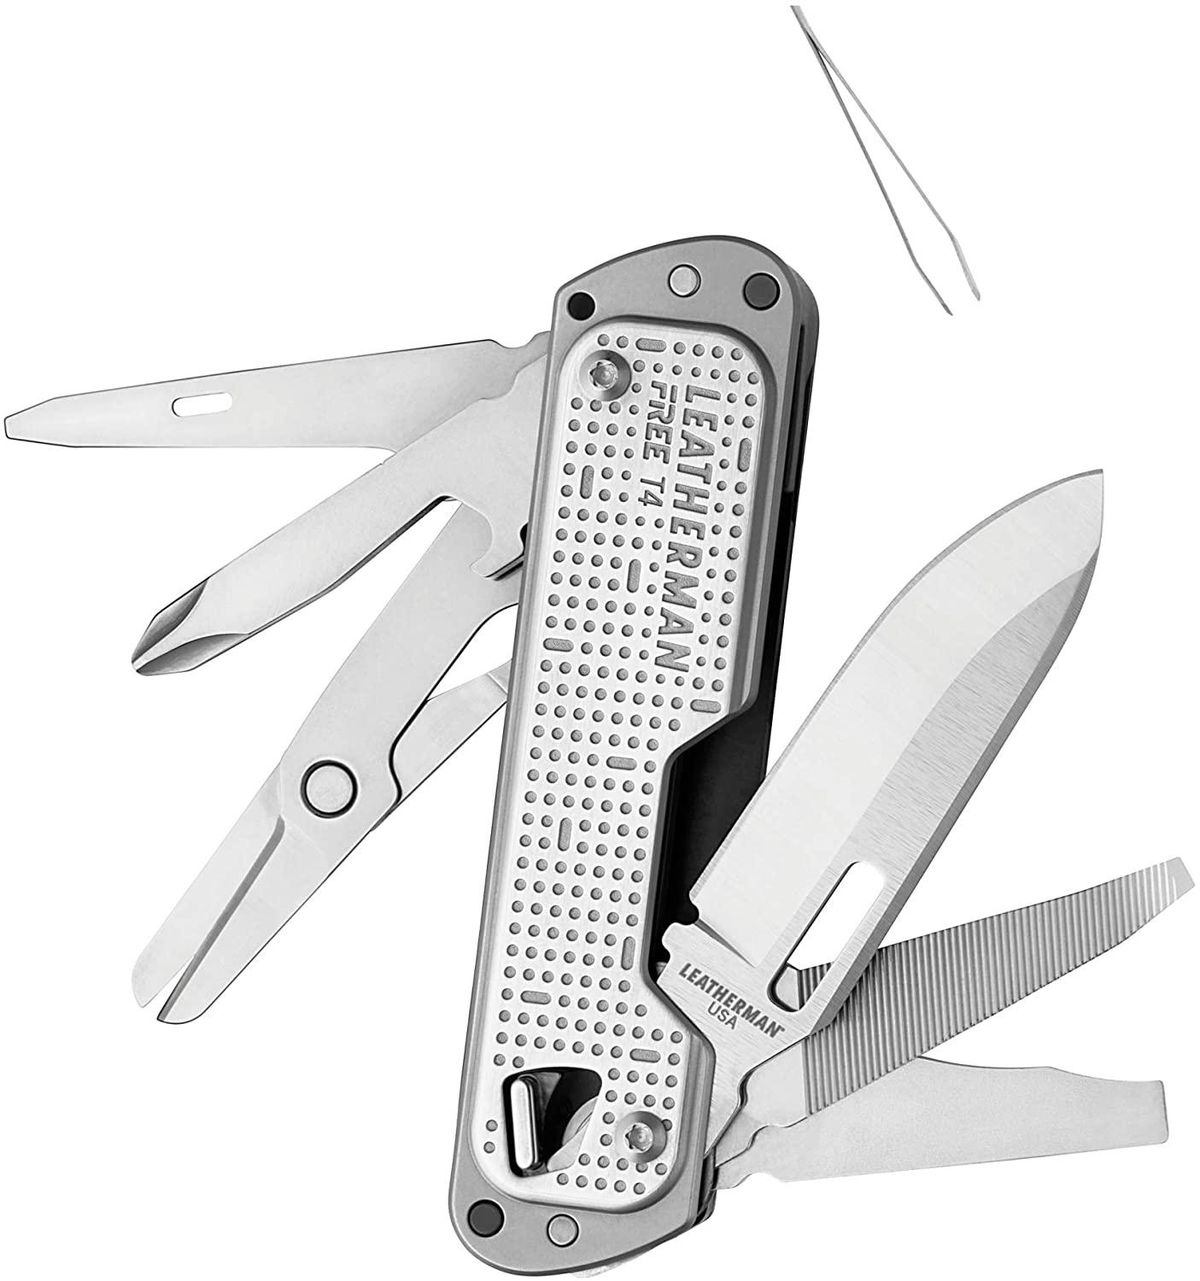 leatherman free t4 multitoo and edc pocket knife with magnetic locking and one hand accessible